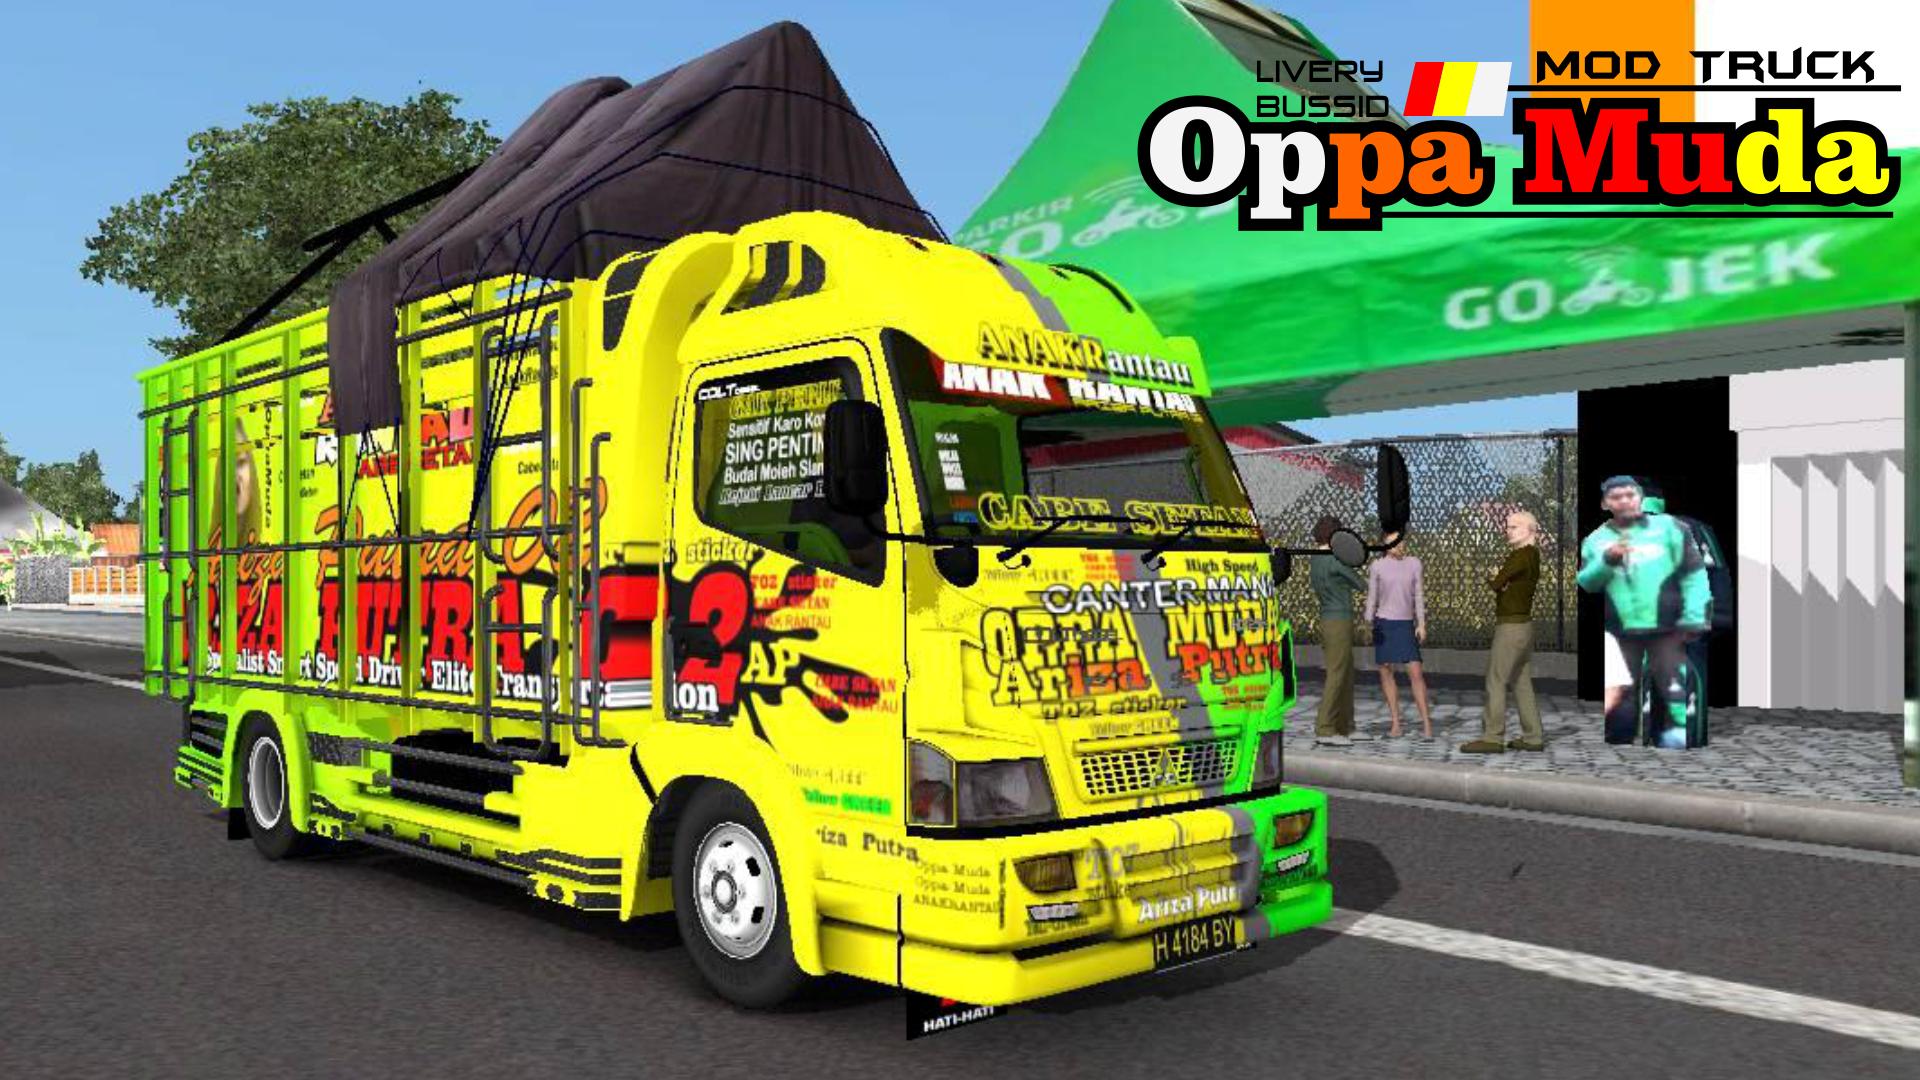 Livery Bussid Mod Truck Oppa Muda Complete for Android  APK Download